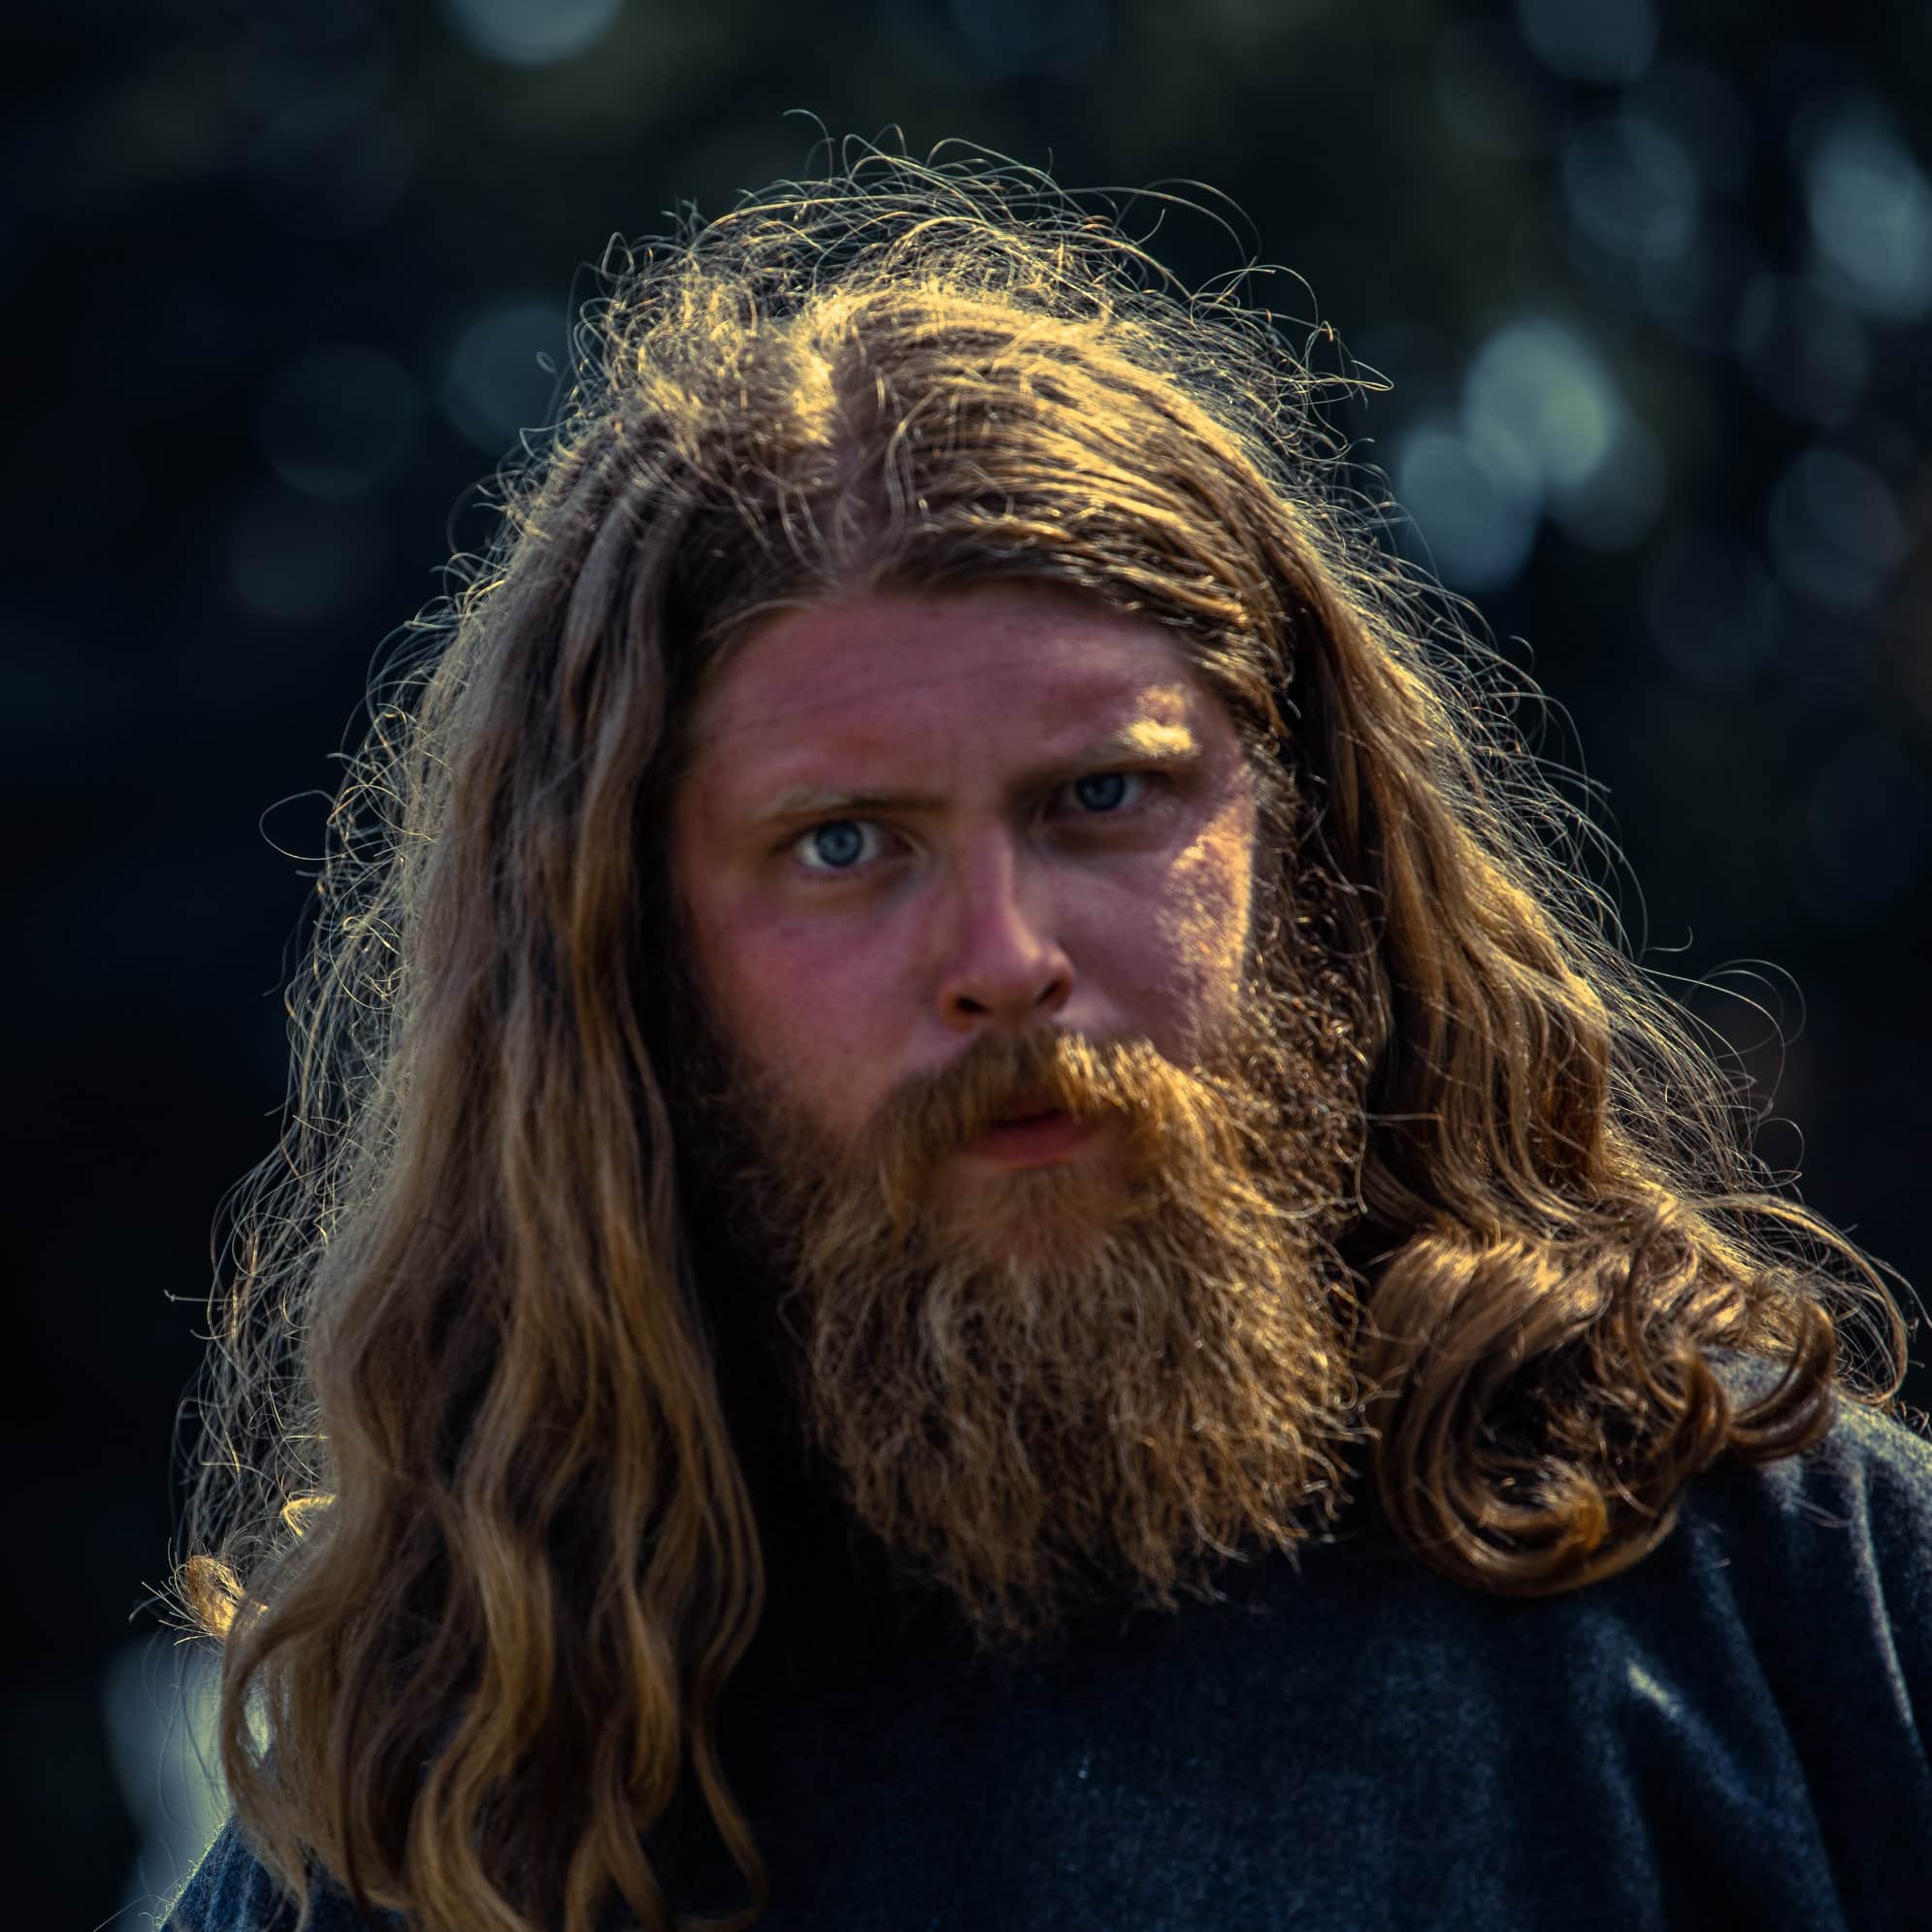 This image shows a viking with long hair and beard, staring intensely at you, so contact us!